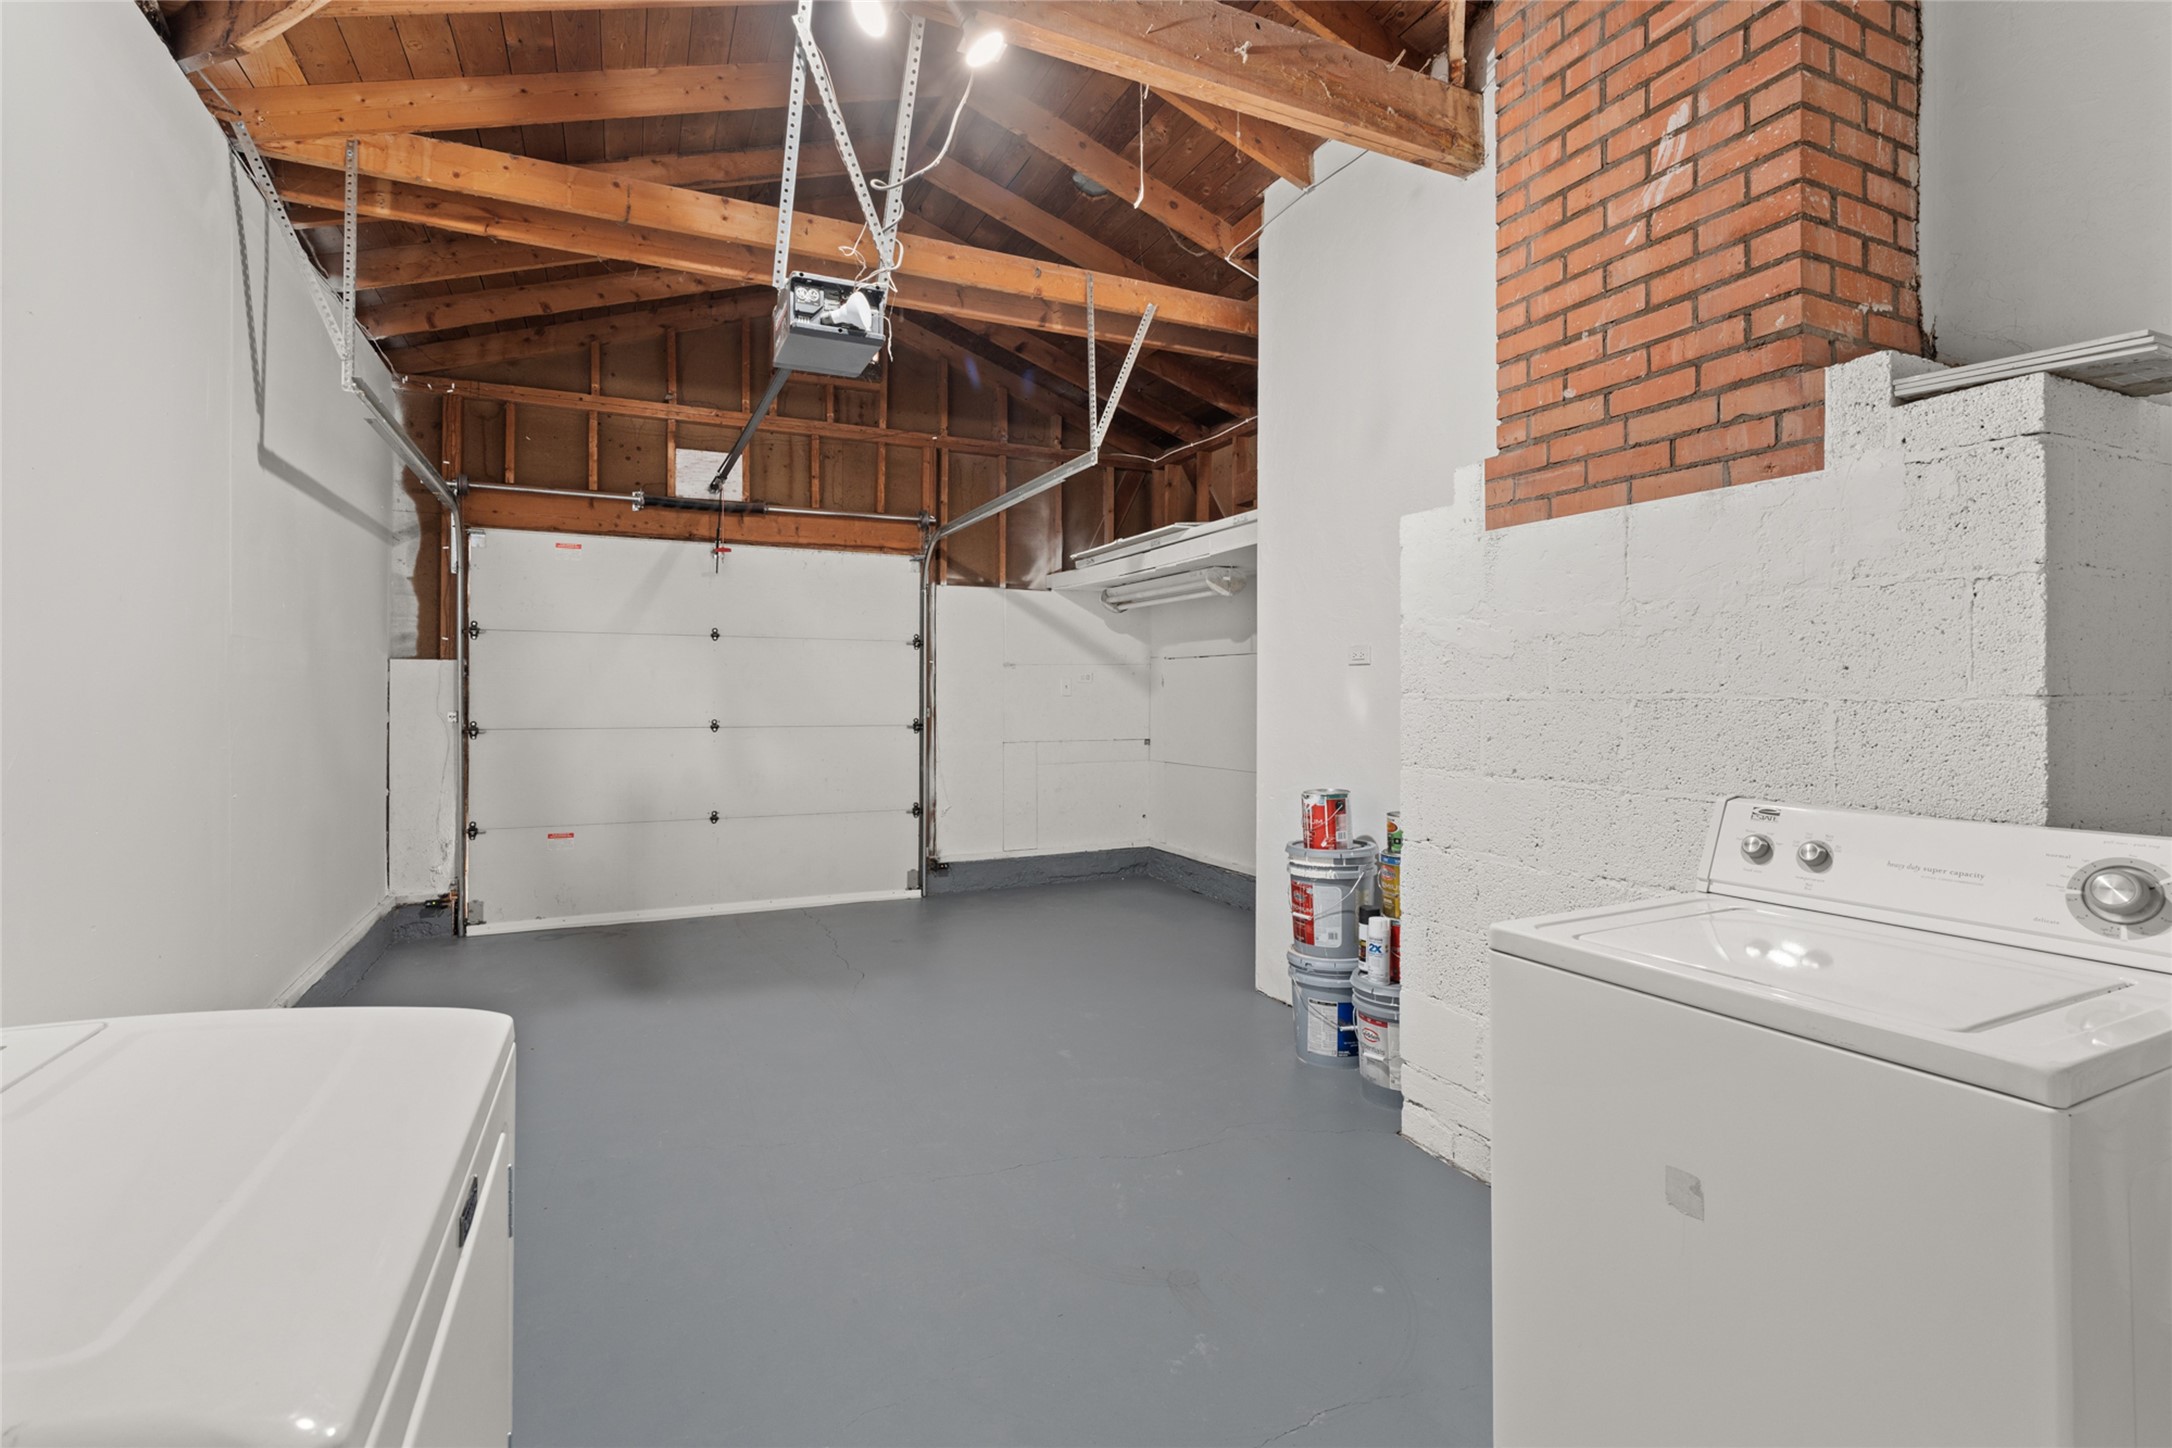 Garage with painted floor, small storage area or shop with washer and dryer